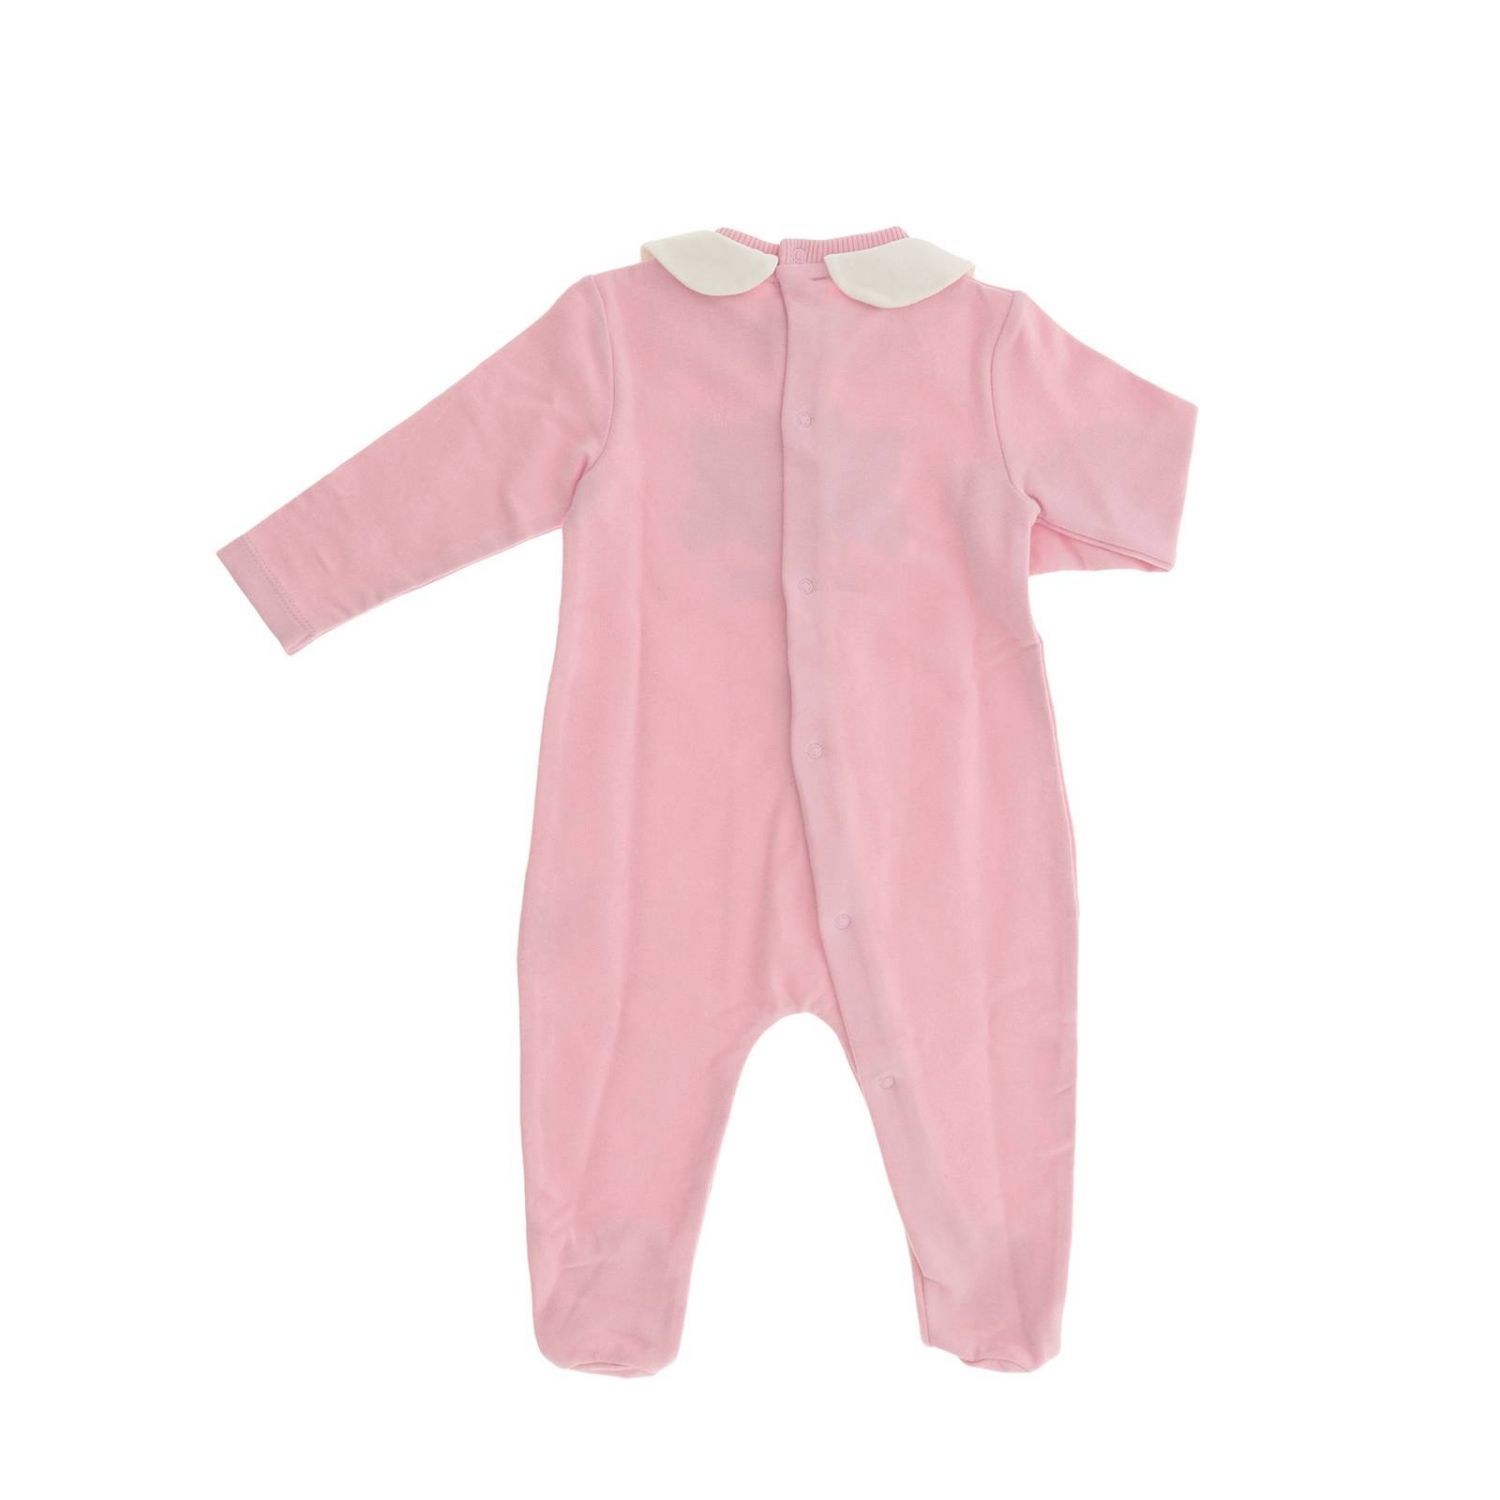 Moschino Baby Outlet: Romper kids - Pink | Romper Moschino Baby MUY01G ...